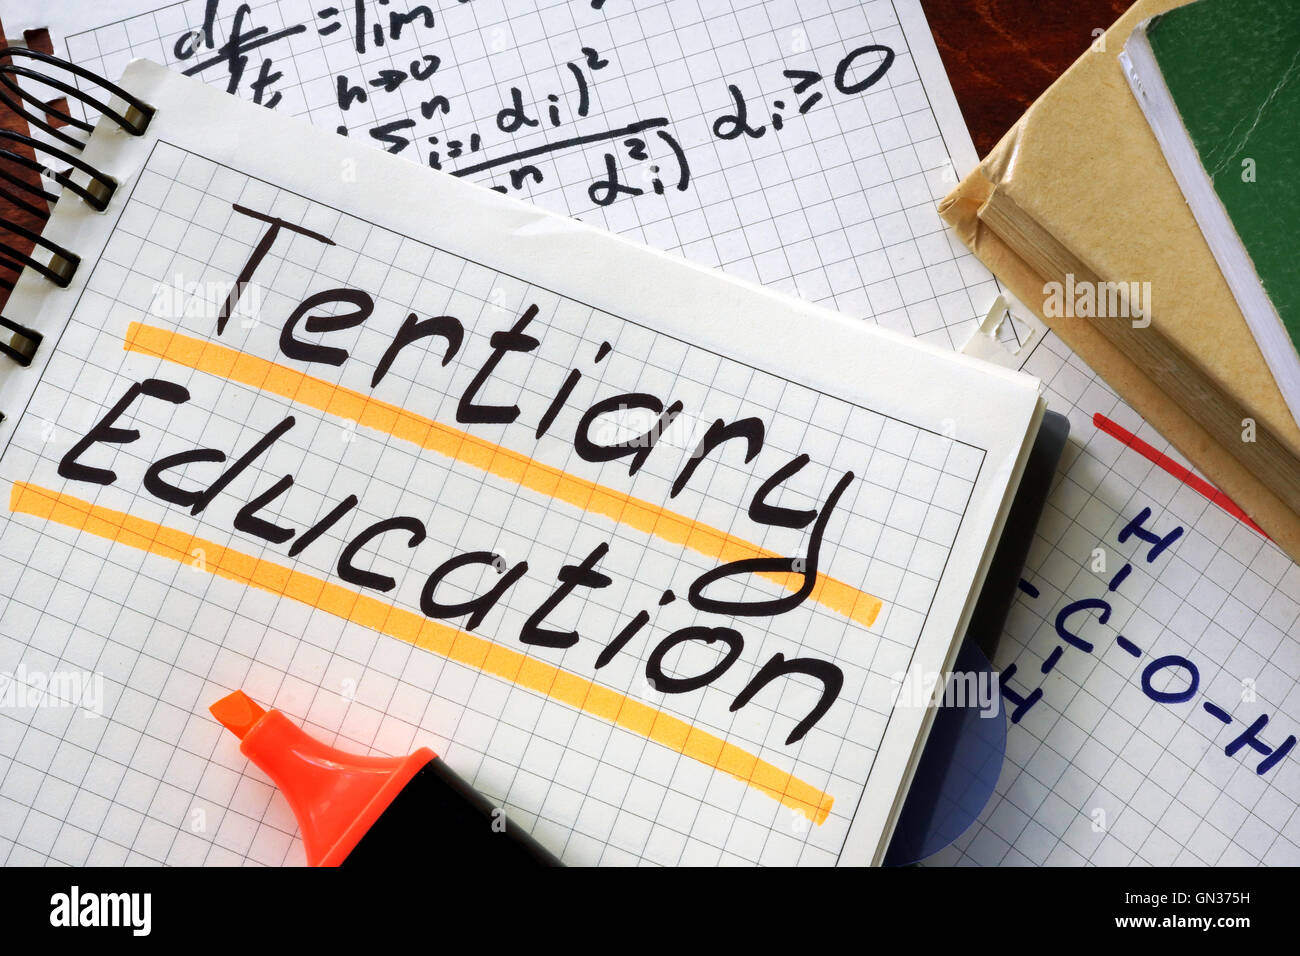 Sign tertiary education written in a notepad on a table. Stock Photo